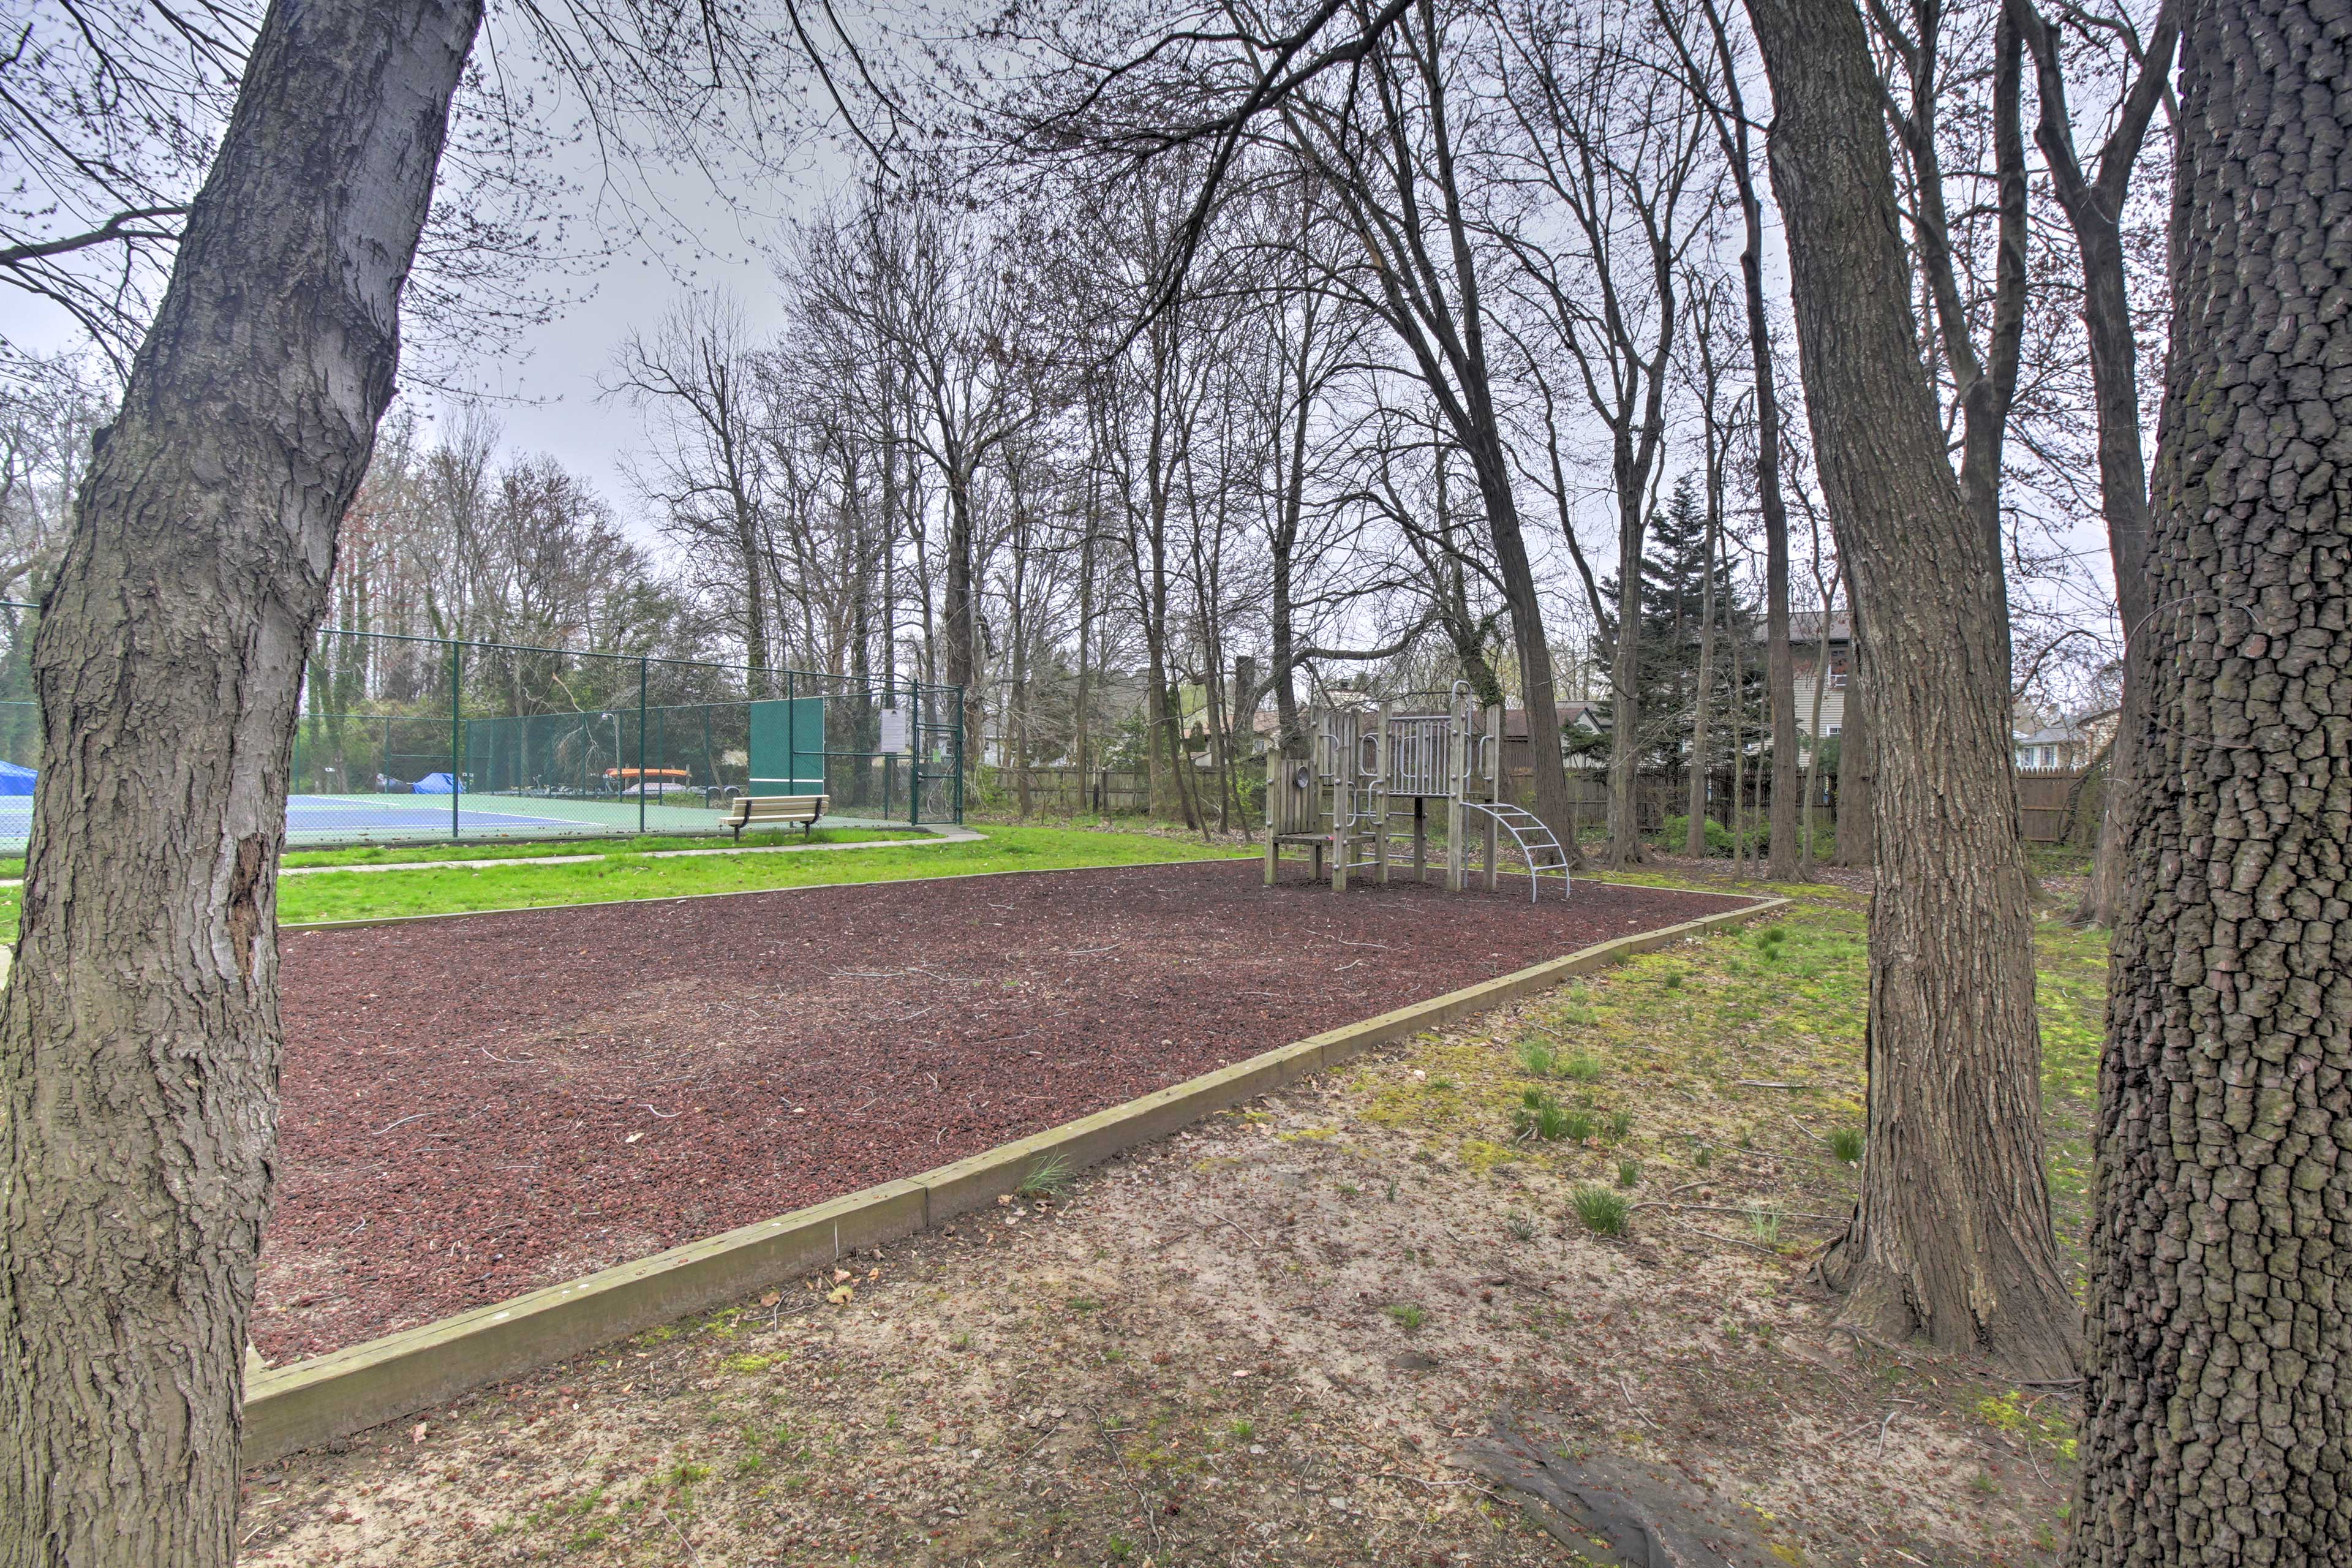 The kids will love the community playground and basketball court!